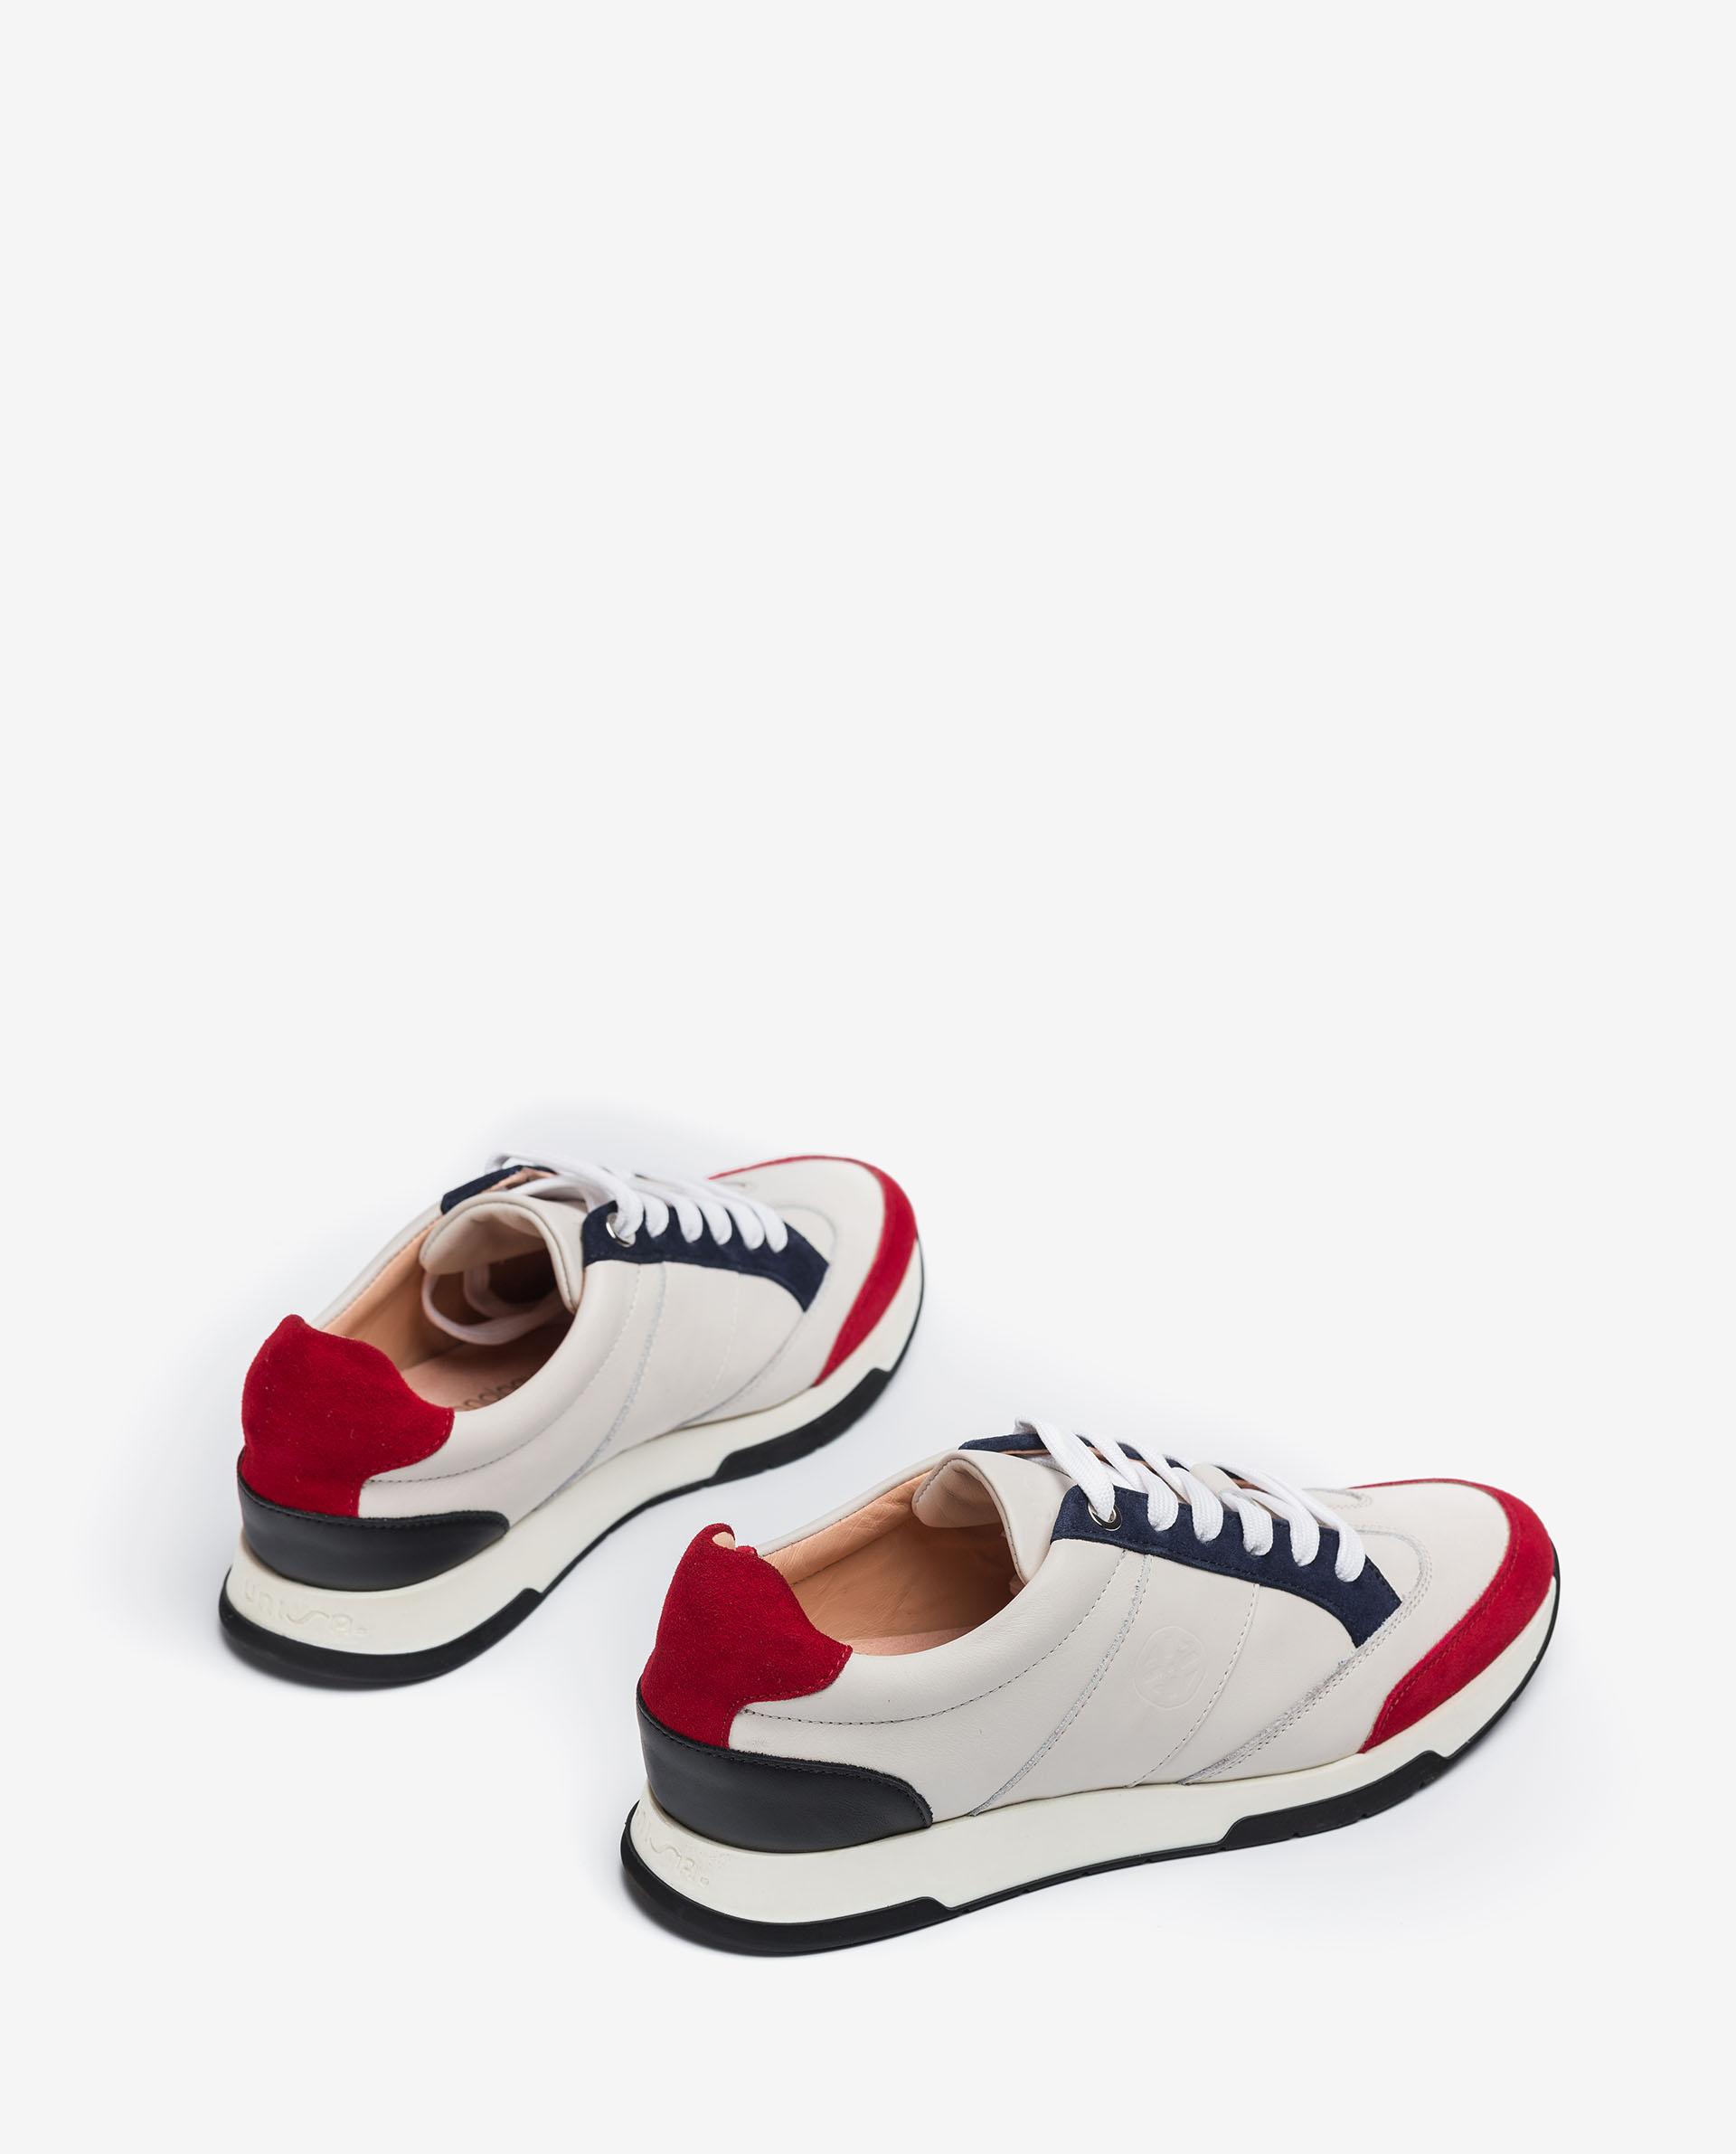 UNISA Monogram leather and kid suede sneakers FALCONI_21_NF_KS 2